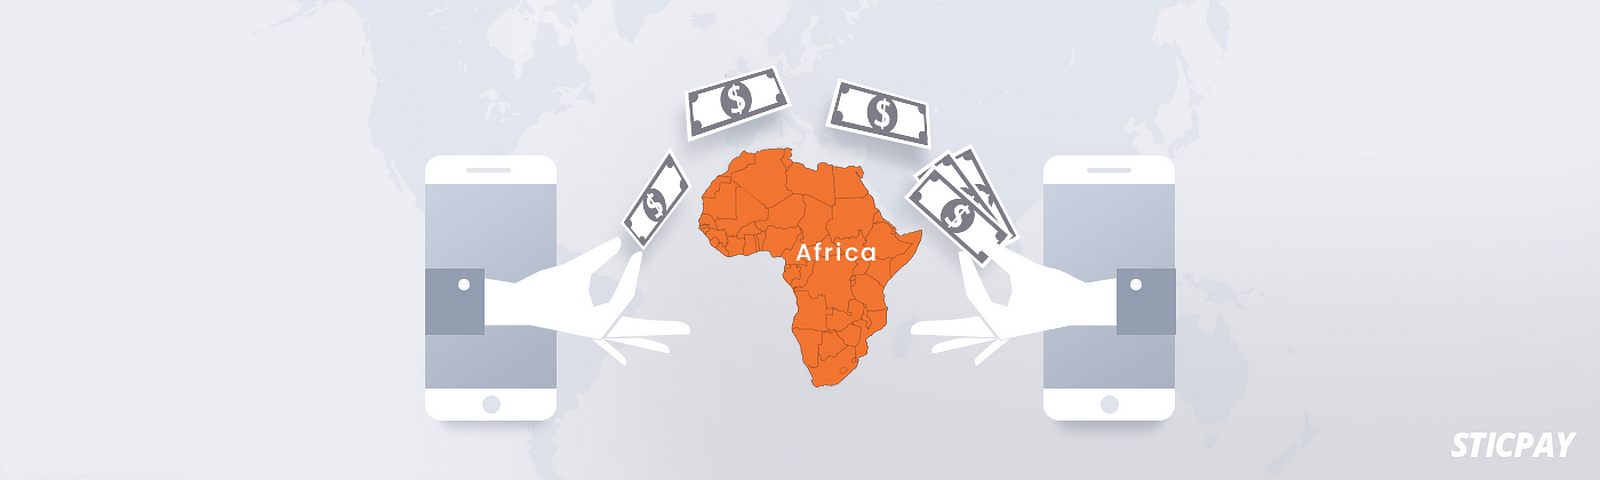 International money transfer policy: an overview of Africa regions (series 1. Nigeria and South Africa)